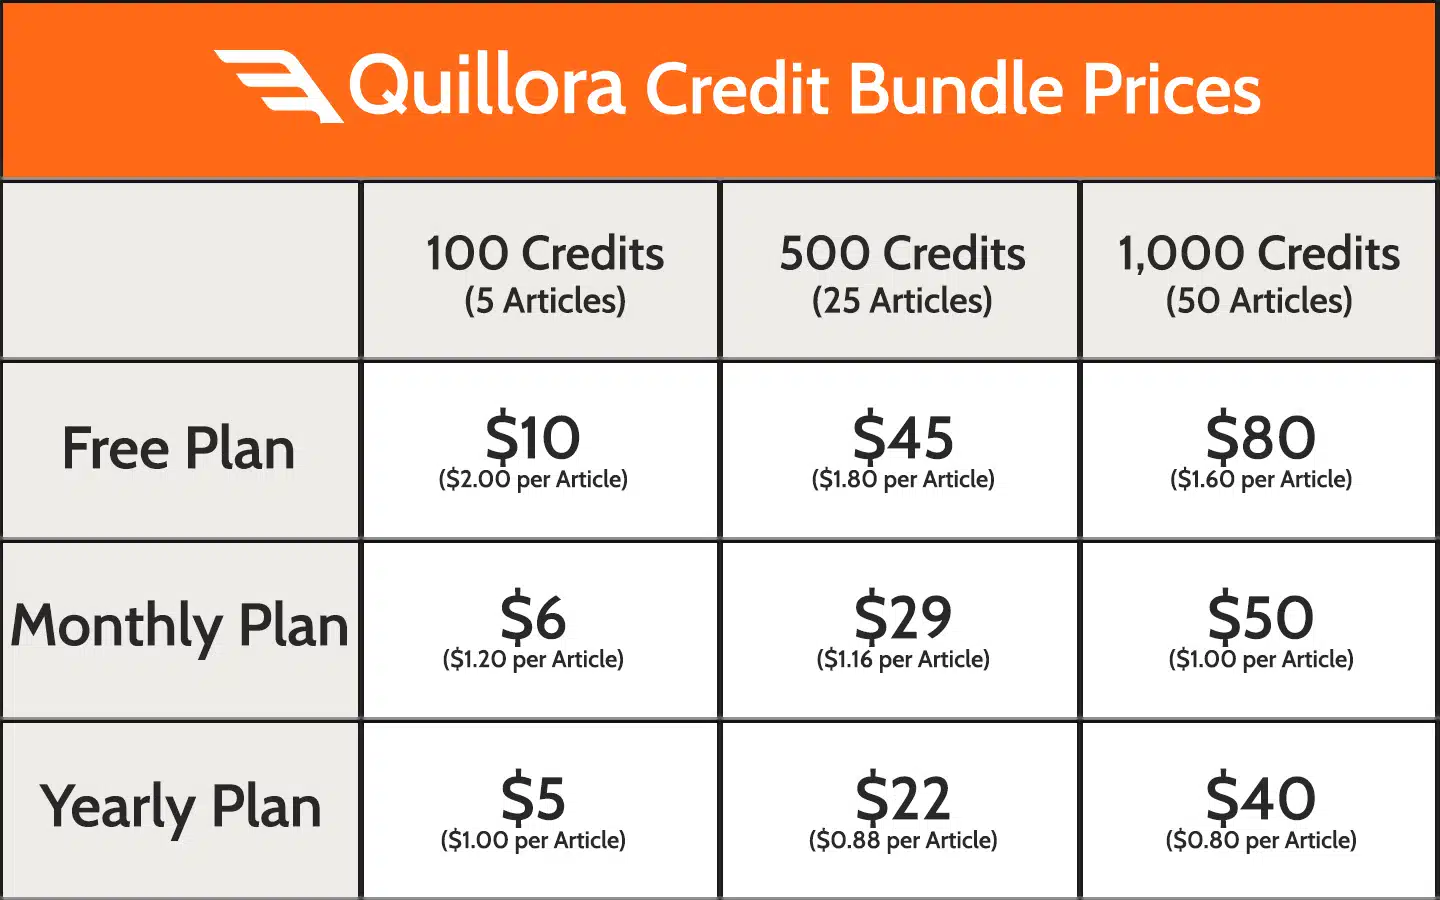 Quillora Credit Bundle Prices in a chart